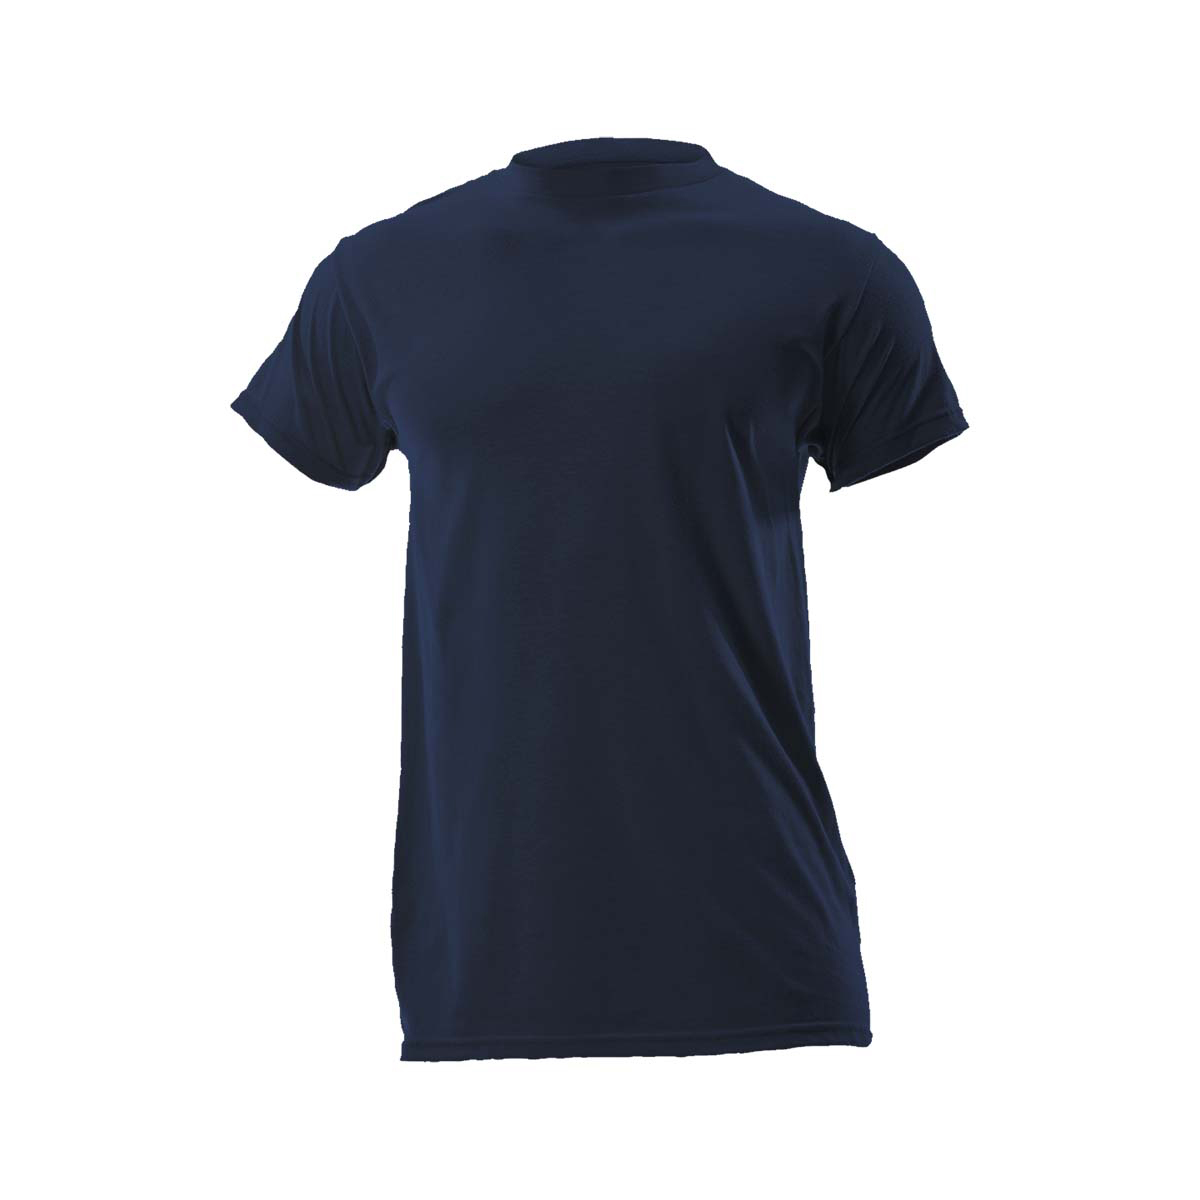 National Safety Apparel Large Navy DRIFIRE® Lite Baselayer Lightweight Flame Resistant Base Layer T-Shirt